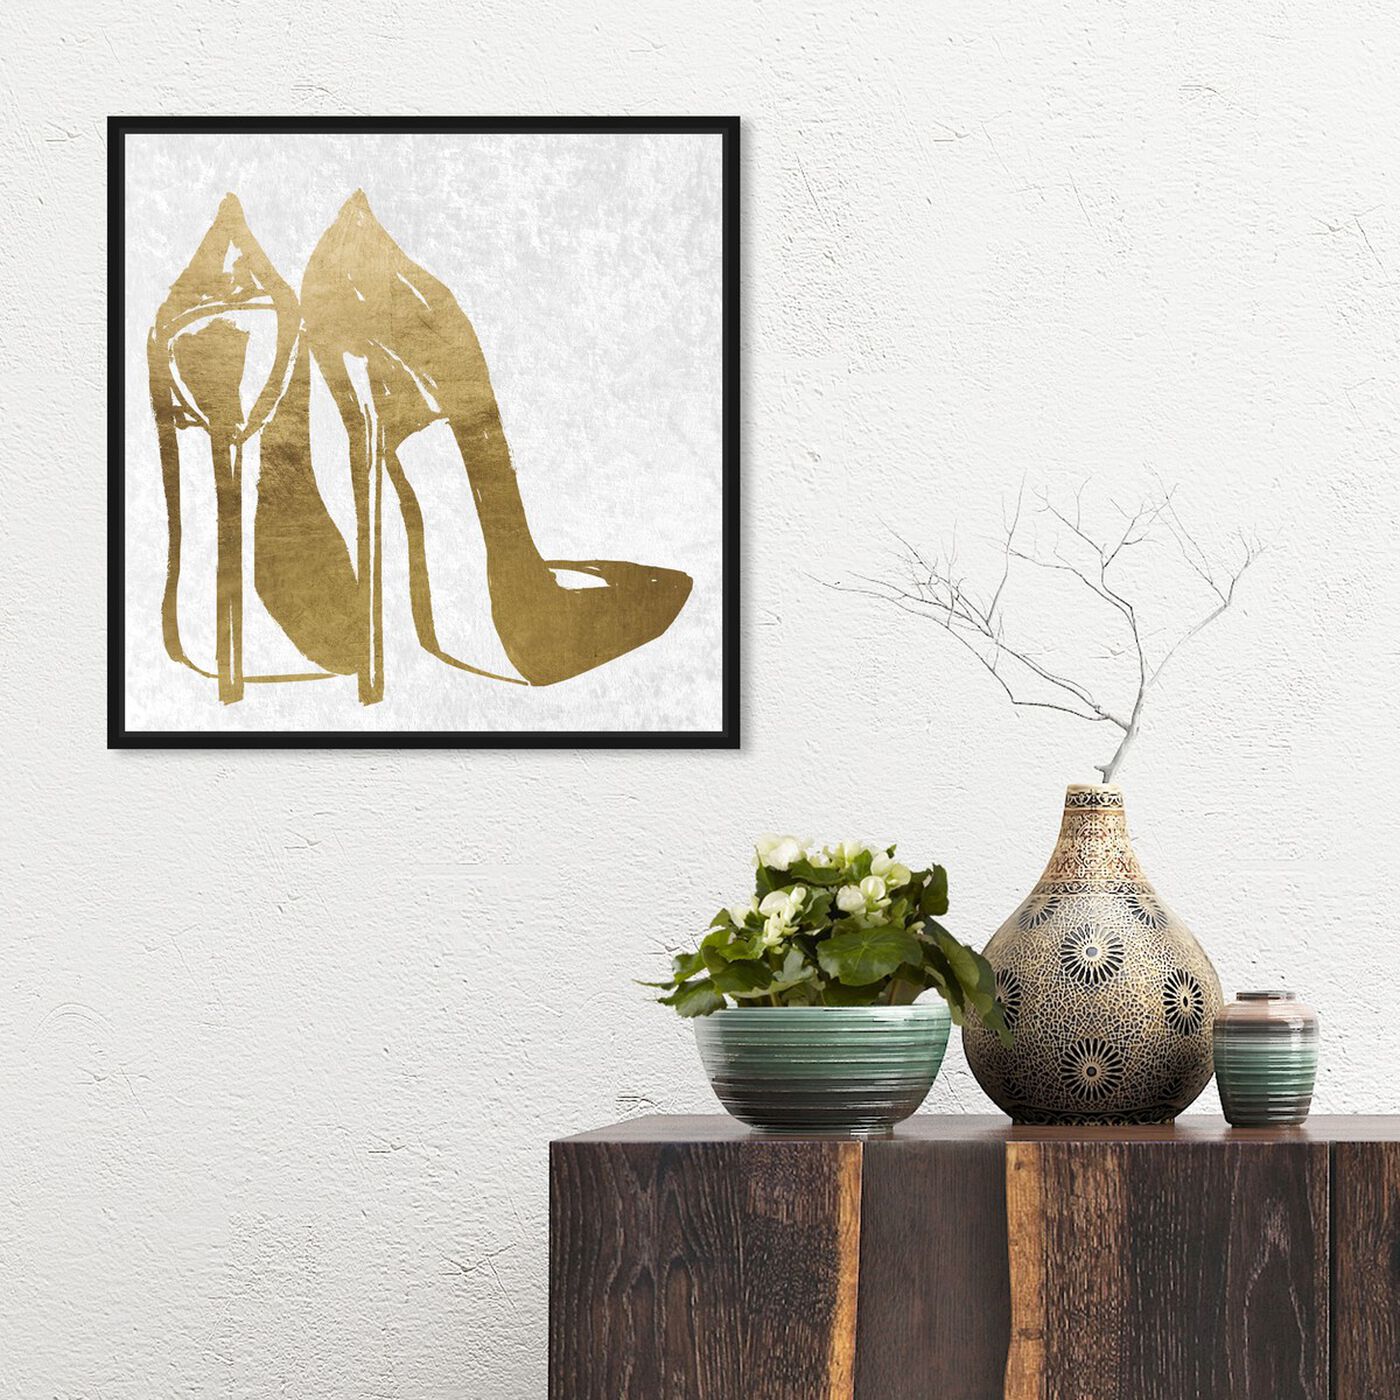 Oliver Gal Heels Heels And Style Books On Canvas 2 Pieces by Oliver Gal  Graphic Art